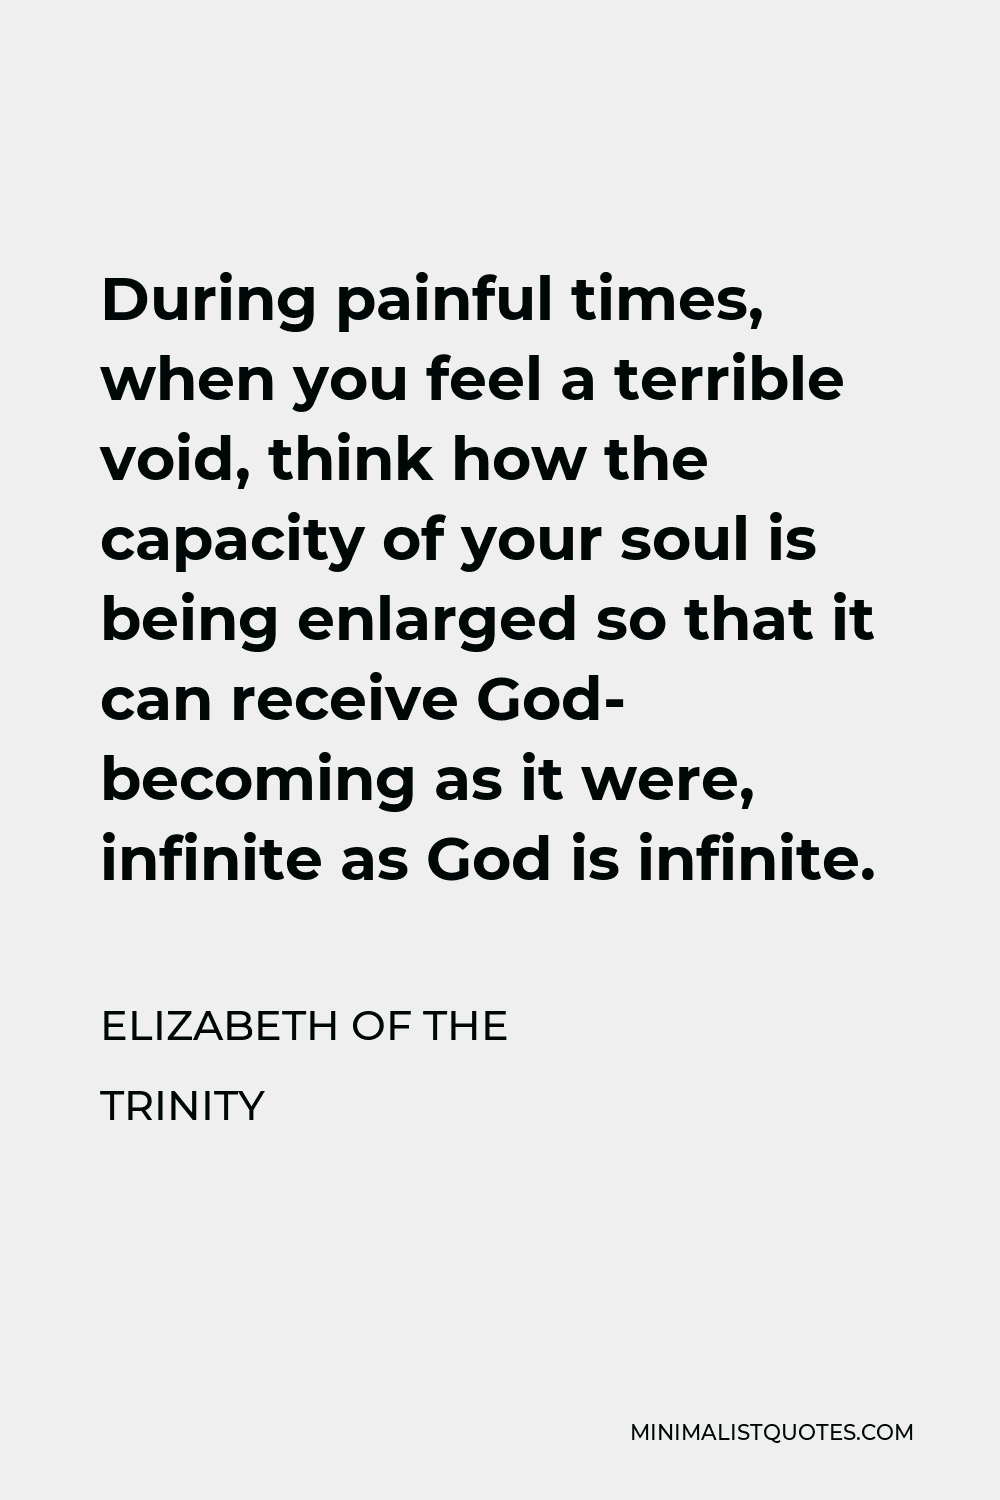 Elizabeth of the Trinity Quote - During painful times, when you feel a terrible void, think how the capacity of your soul is being enlarged so that it can receive God- becoming as it were, infinite as God is infinite.